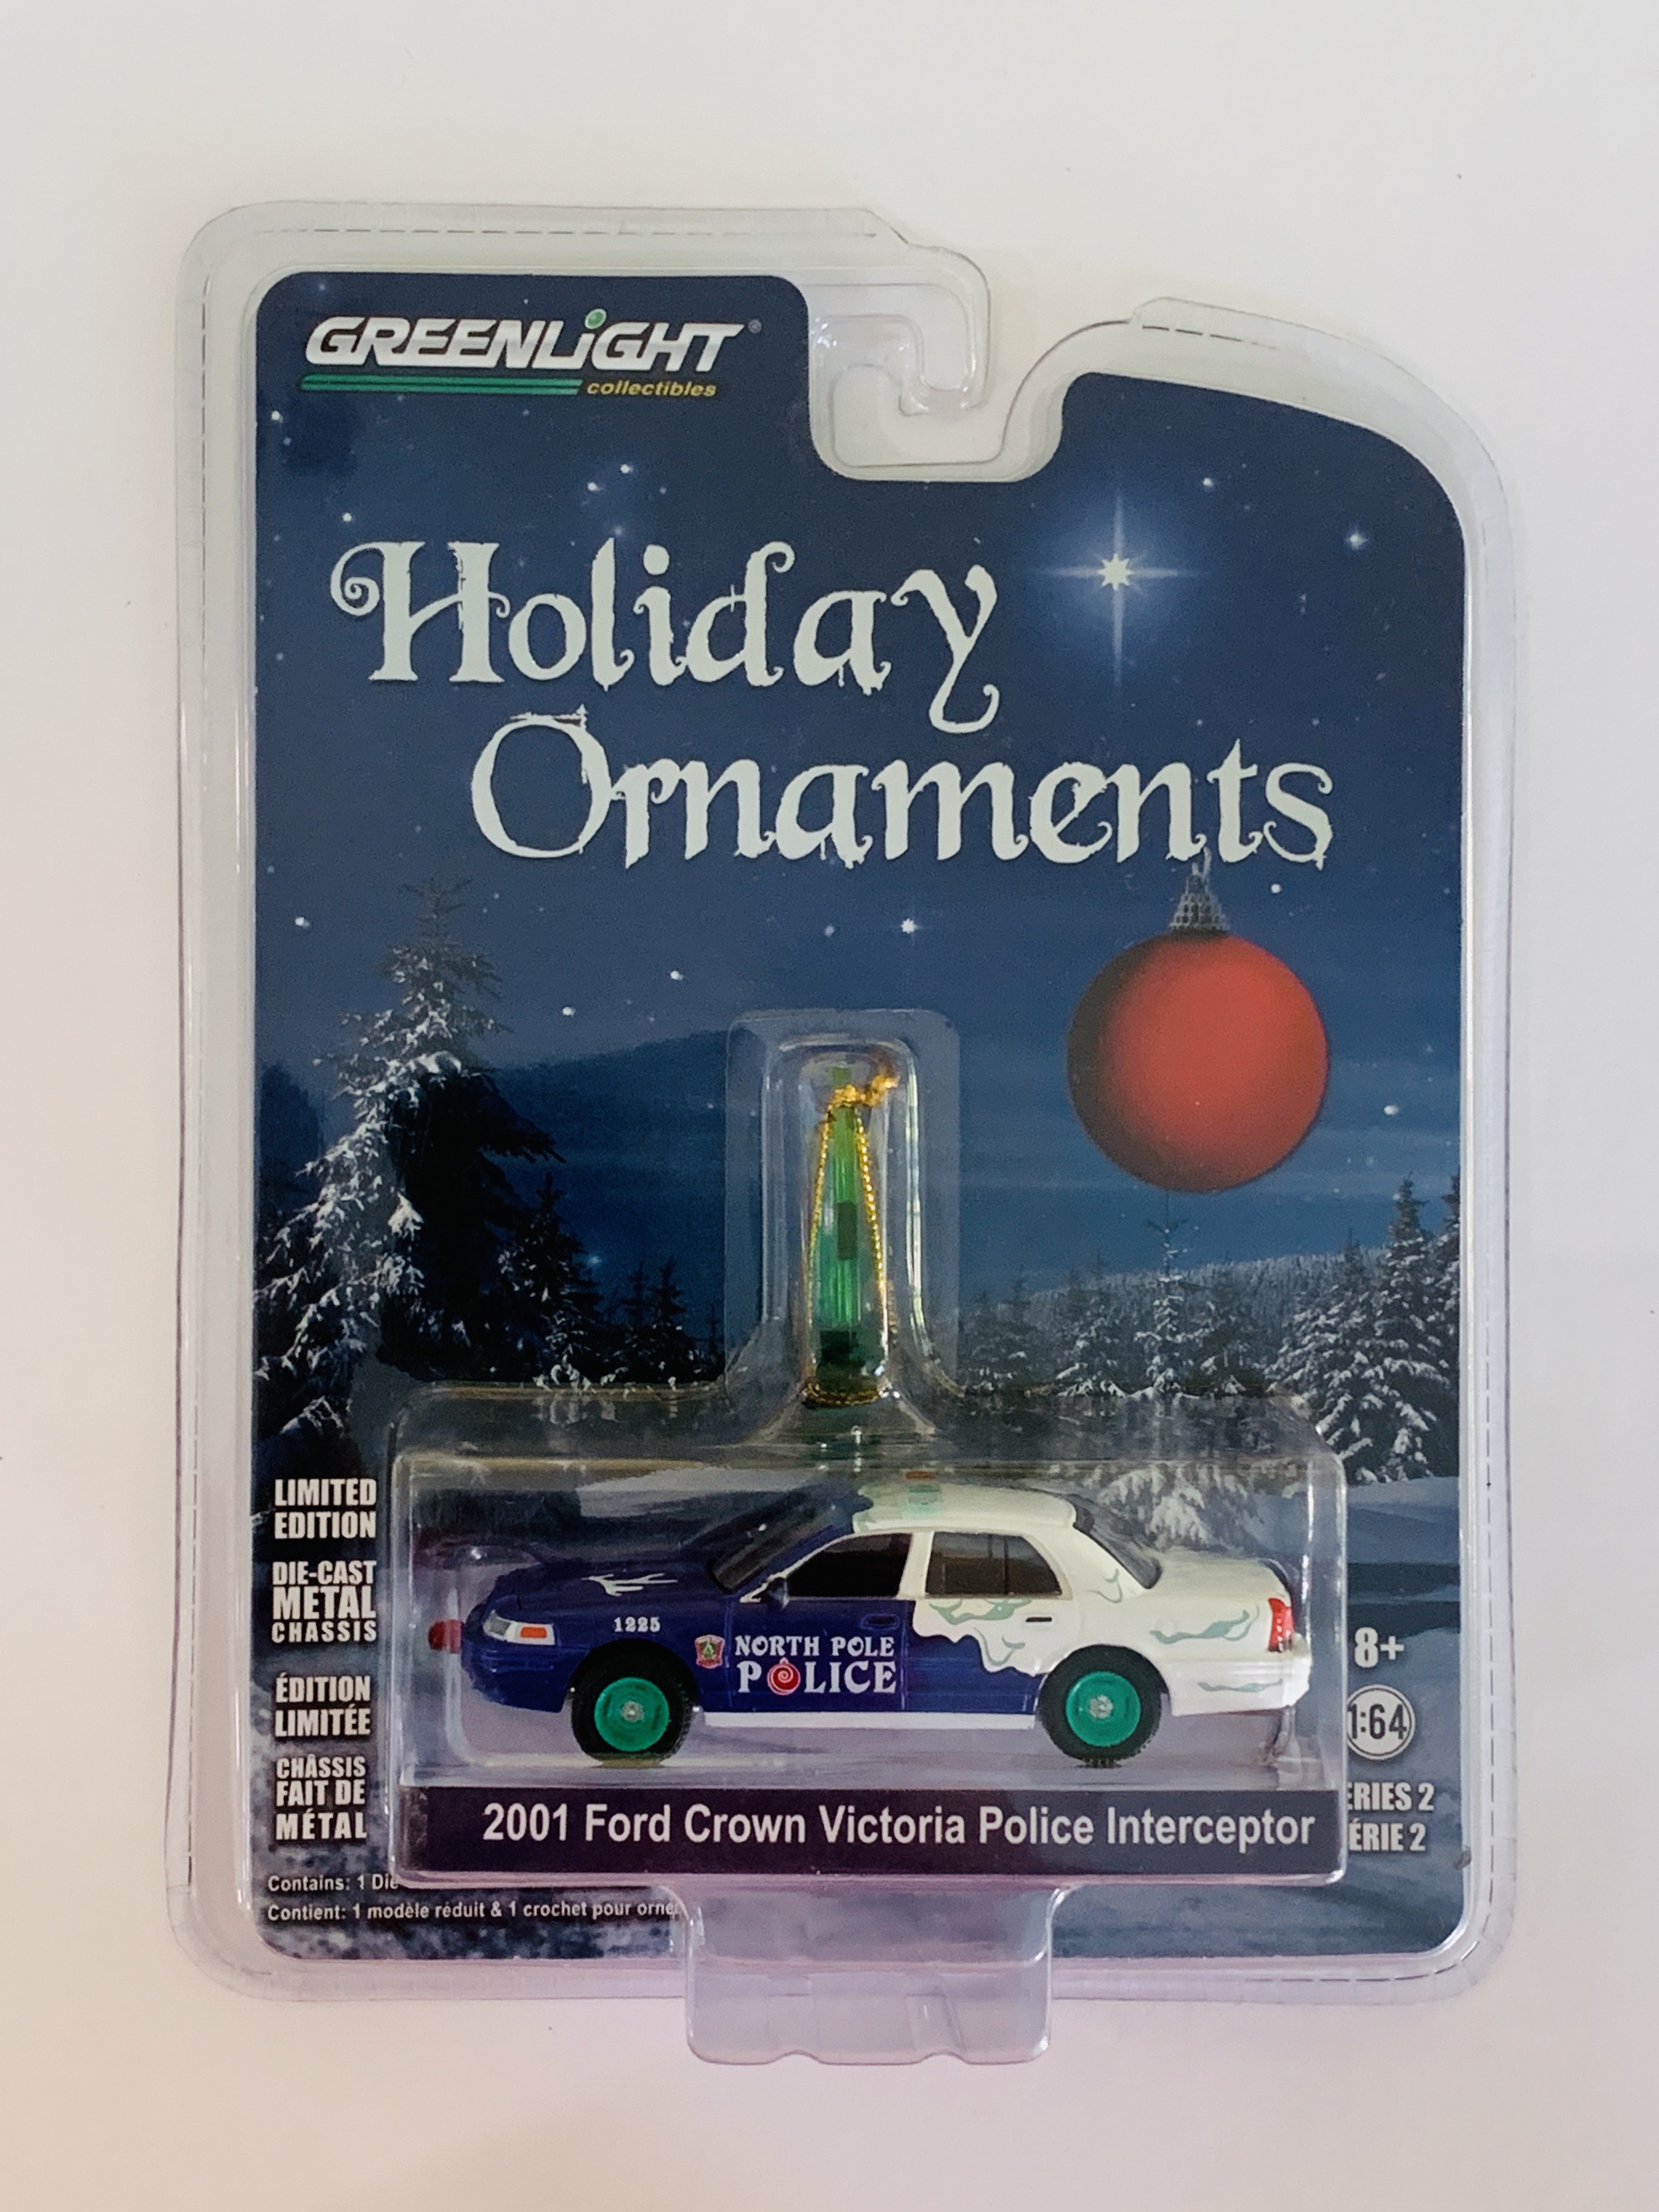 Greenlight Holiday Ornaments 2001 Ford Crown Victoria Police Interceptor Green Machine